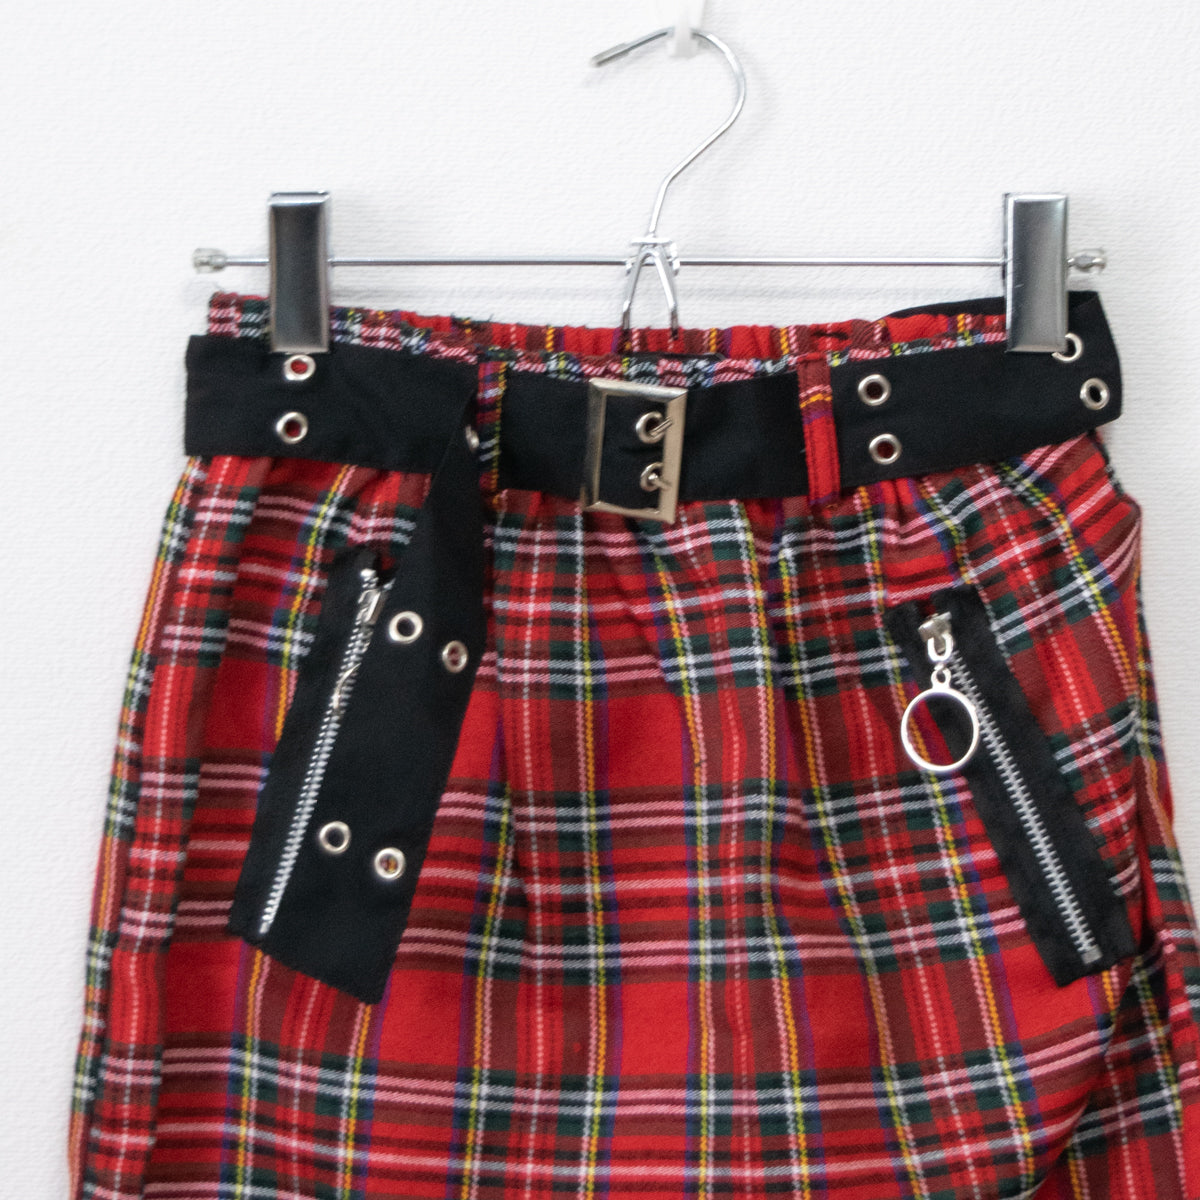 ACDC Rag Wing Heart Miniskirt Red Tartan Check - YOUAREMYPOISON